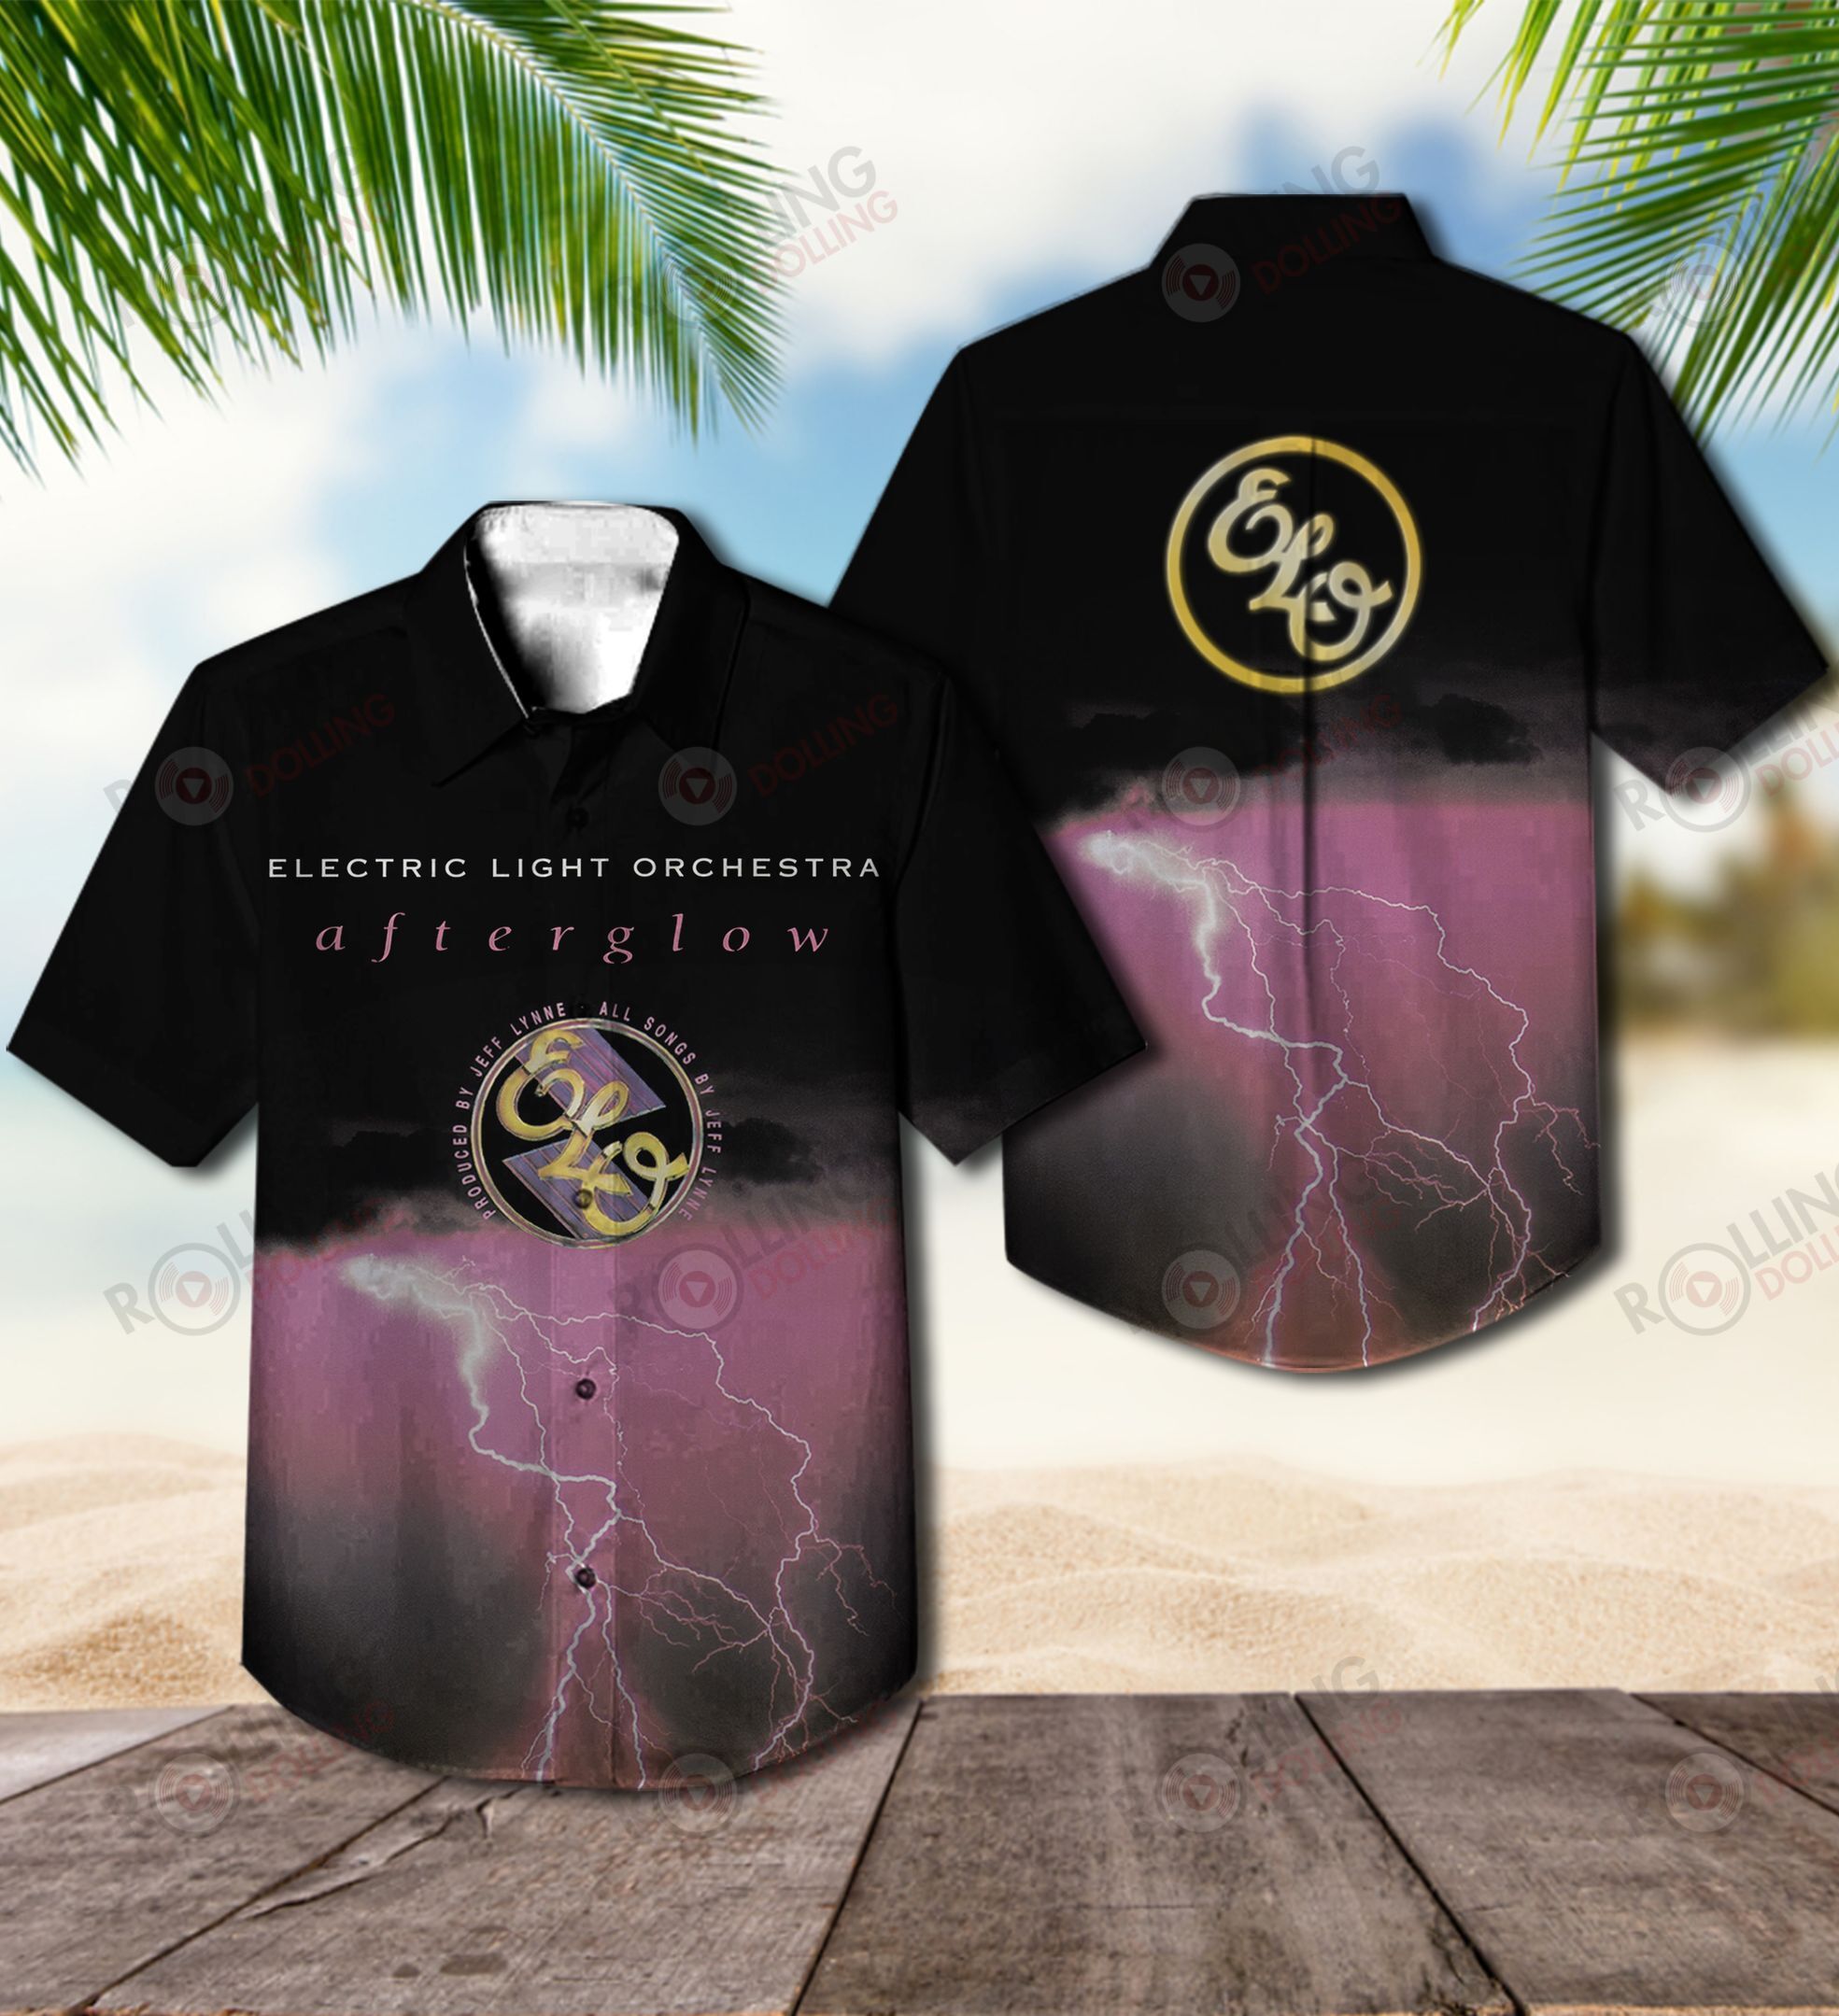 This would make a great gift for any fan who loves Hawaiian Shirt as well as Rock band 137